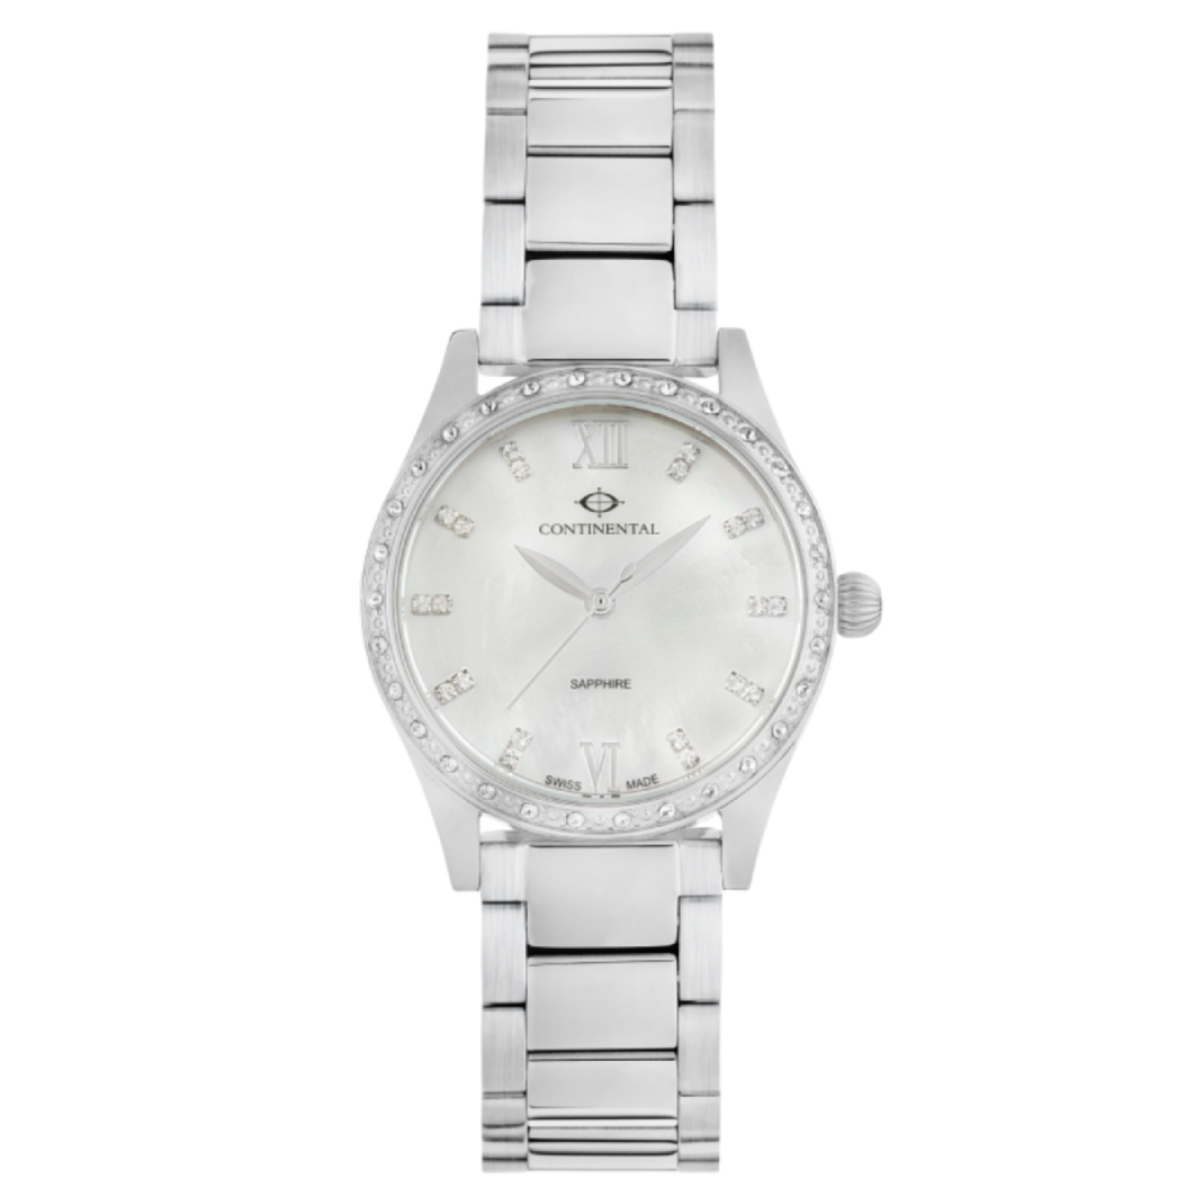 Continental Ladies Dress Watch 18101-LT101501 - front view